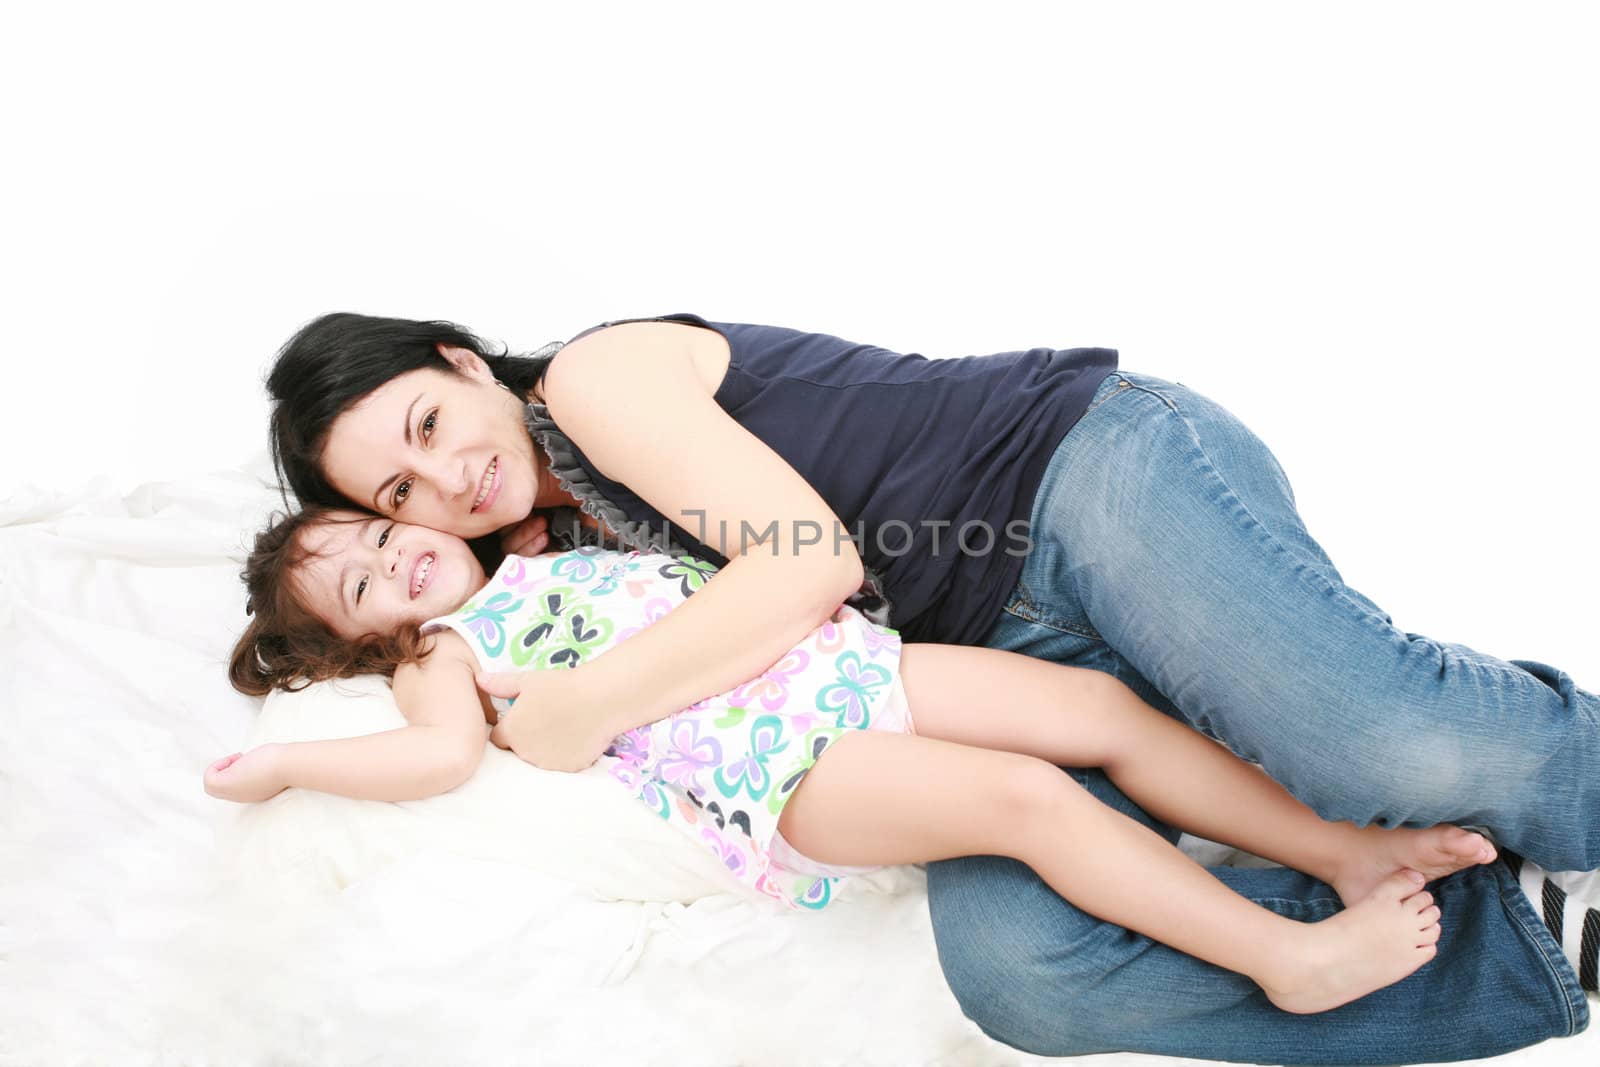 mother and daughter having fun at home